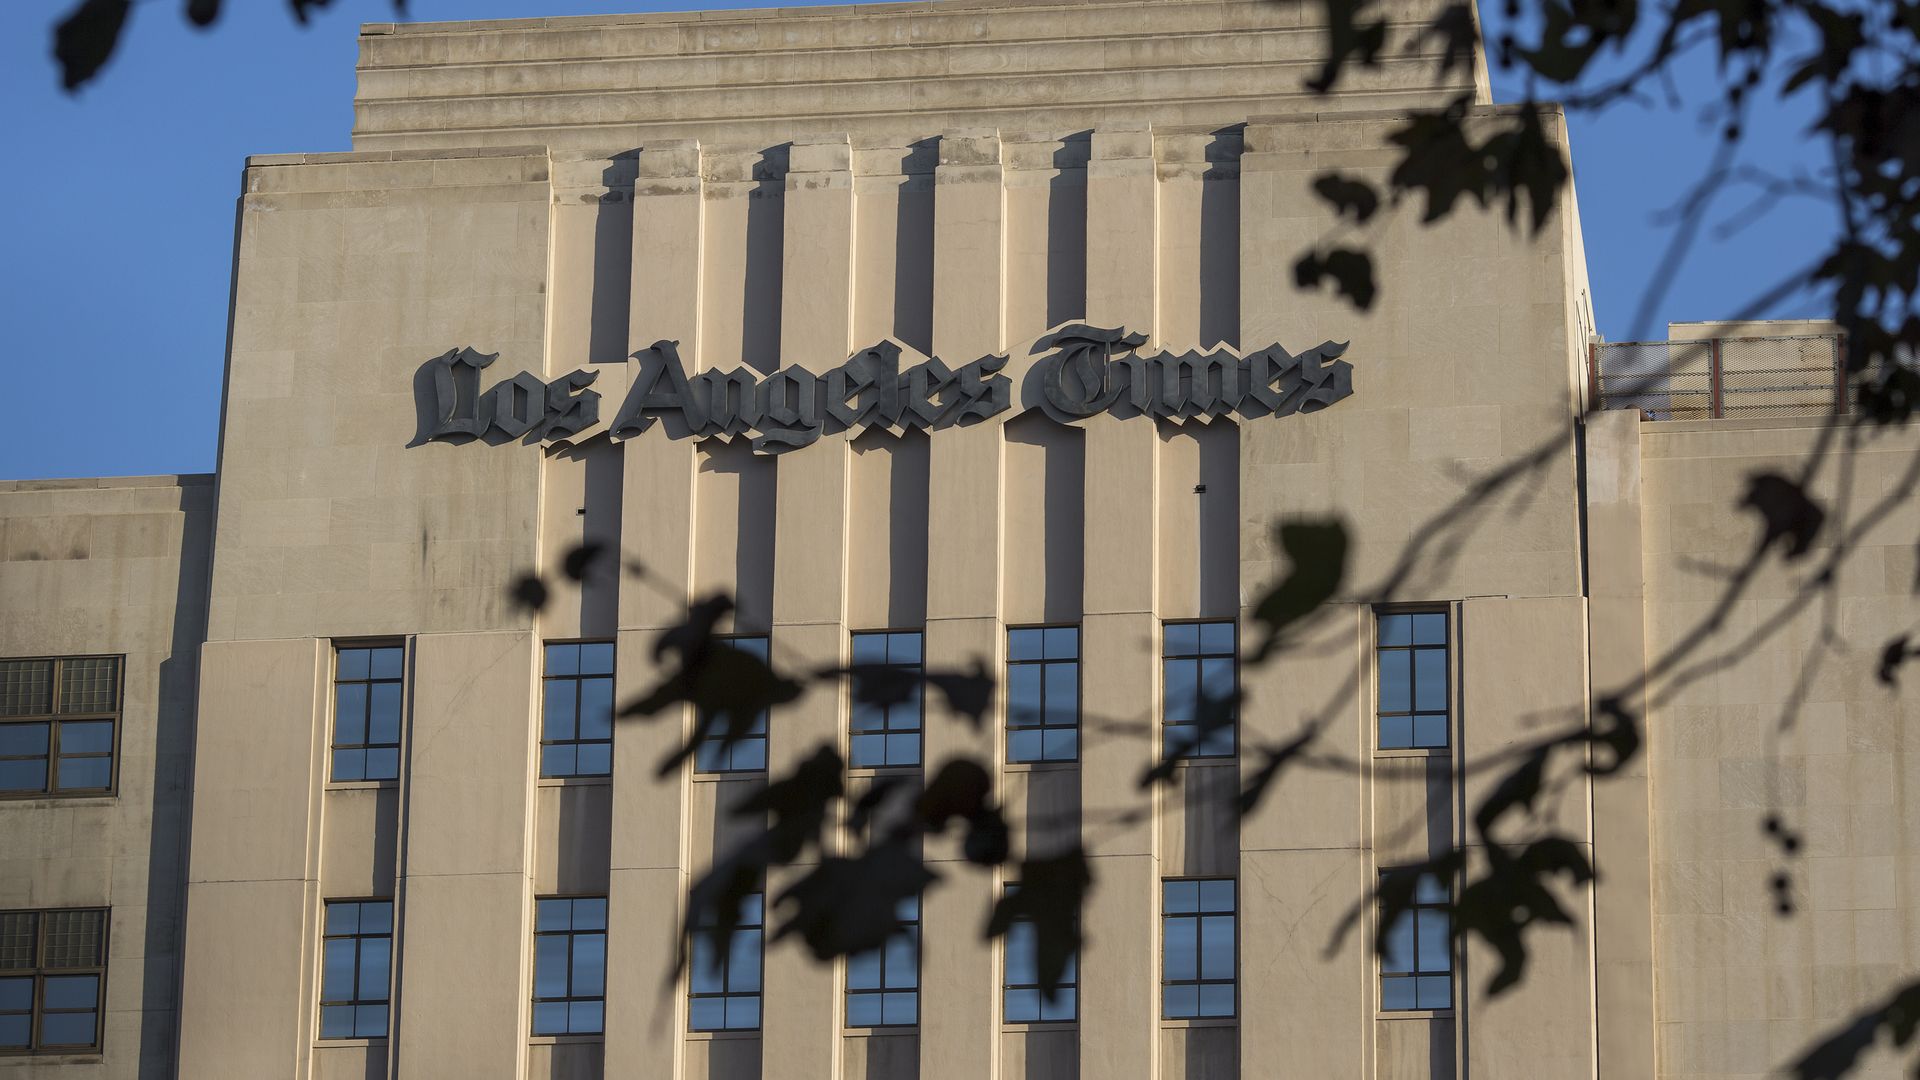 The Los Angeles Times building.